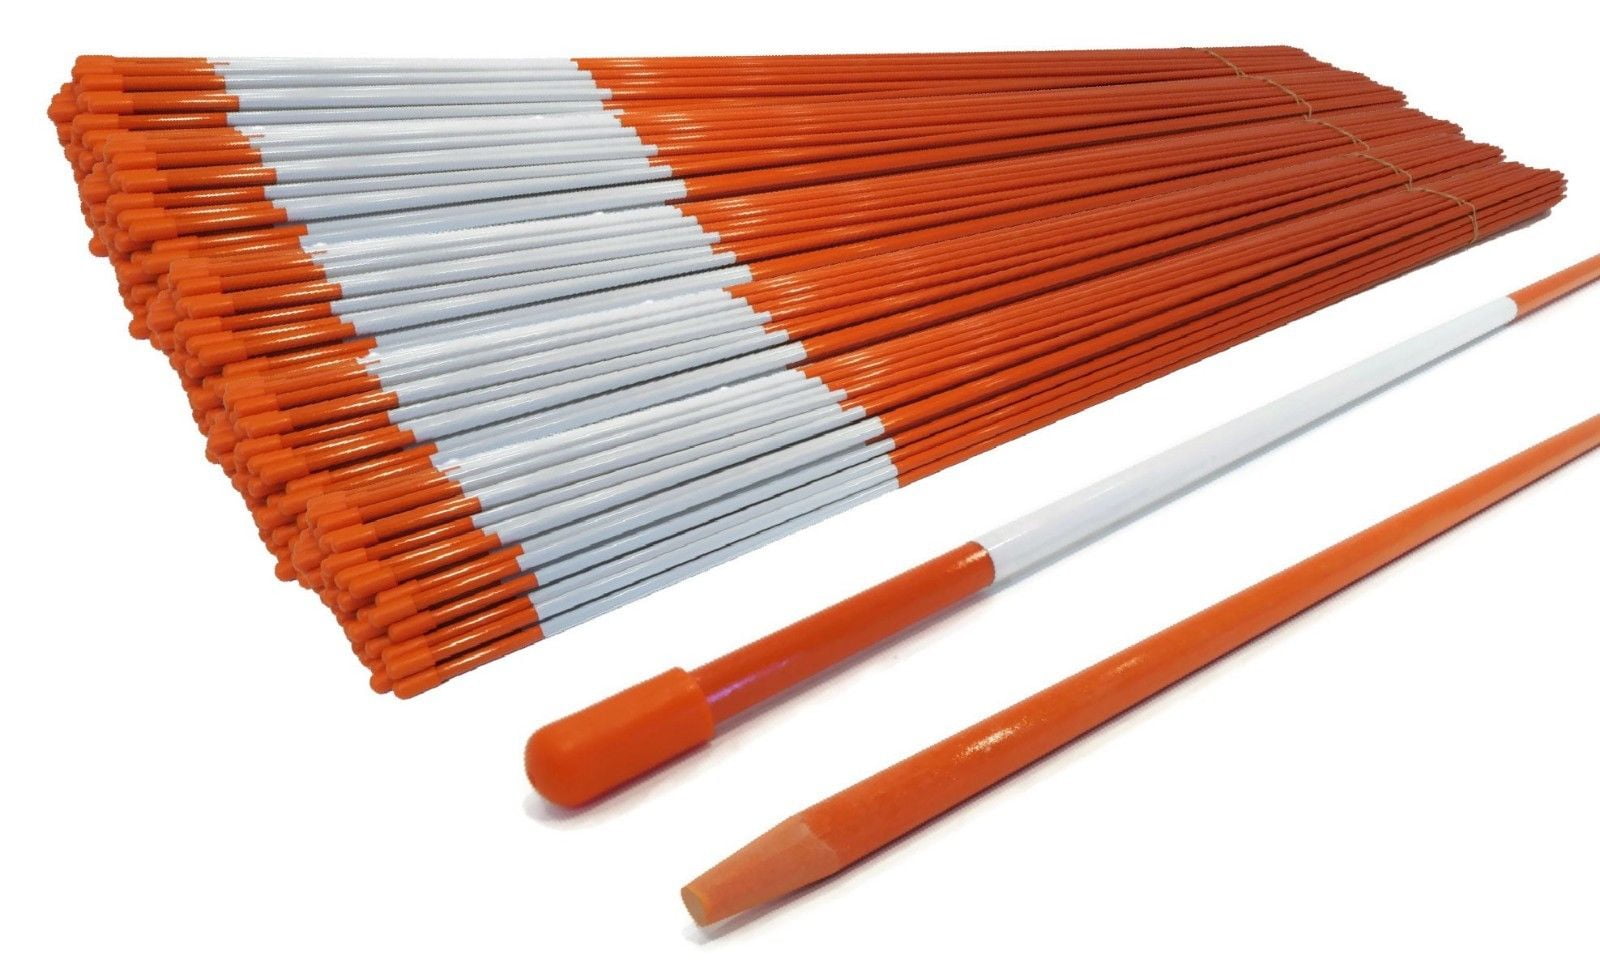 1/4 inch for Visibility when Snow Plowing Details about   Pack of 20 Landscape Rods 48 inches